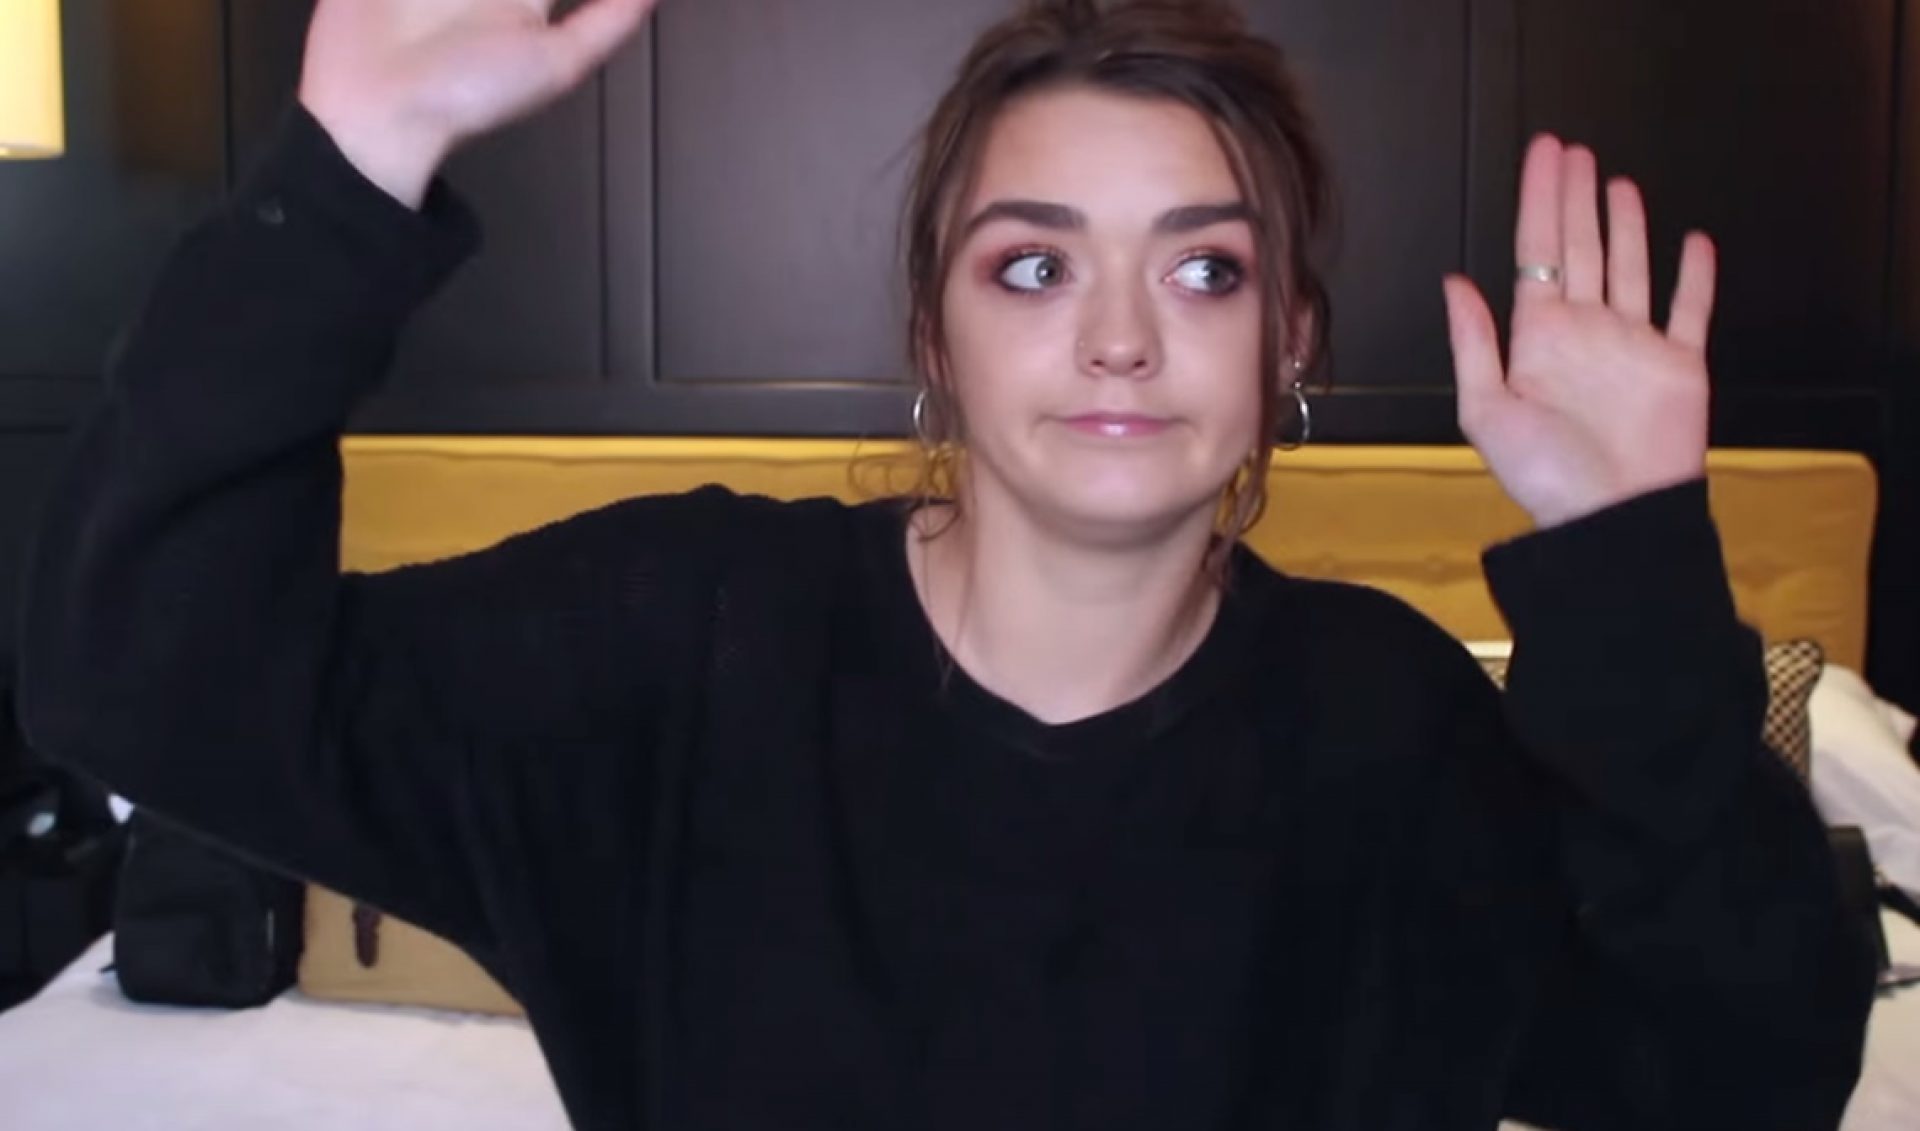 ‘Game Of Thrones’ Star Maisie Williams Launches A YouTube Channel